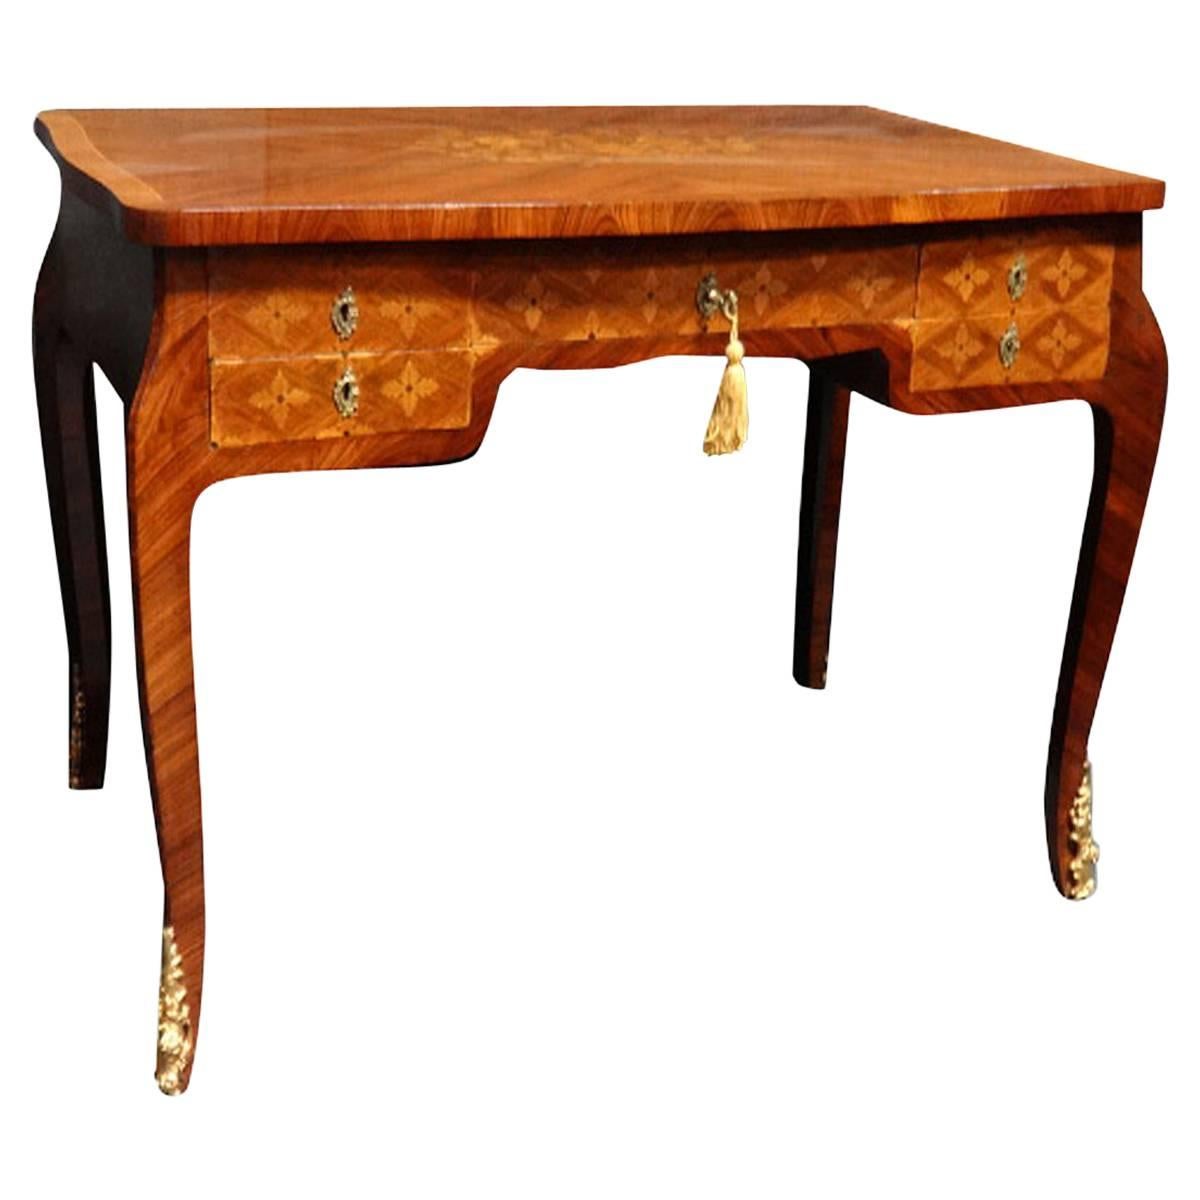 Superb French Kingwood Marquetry and Parquetry Desk For Sale